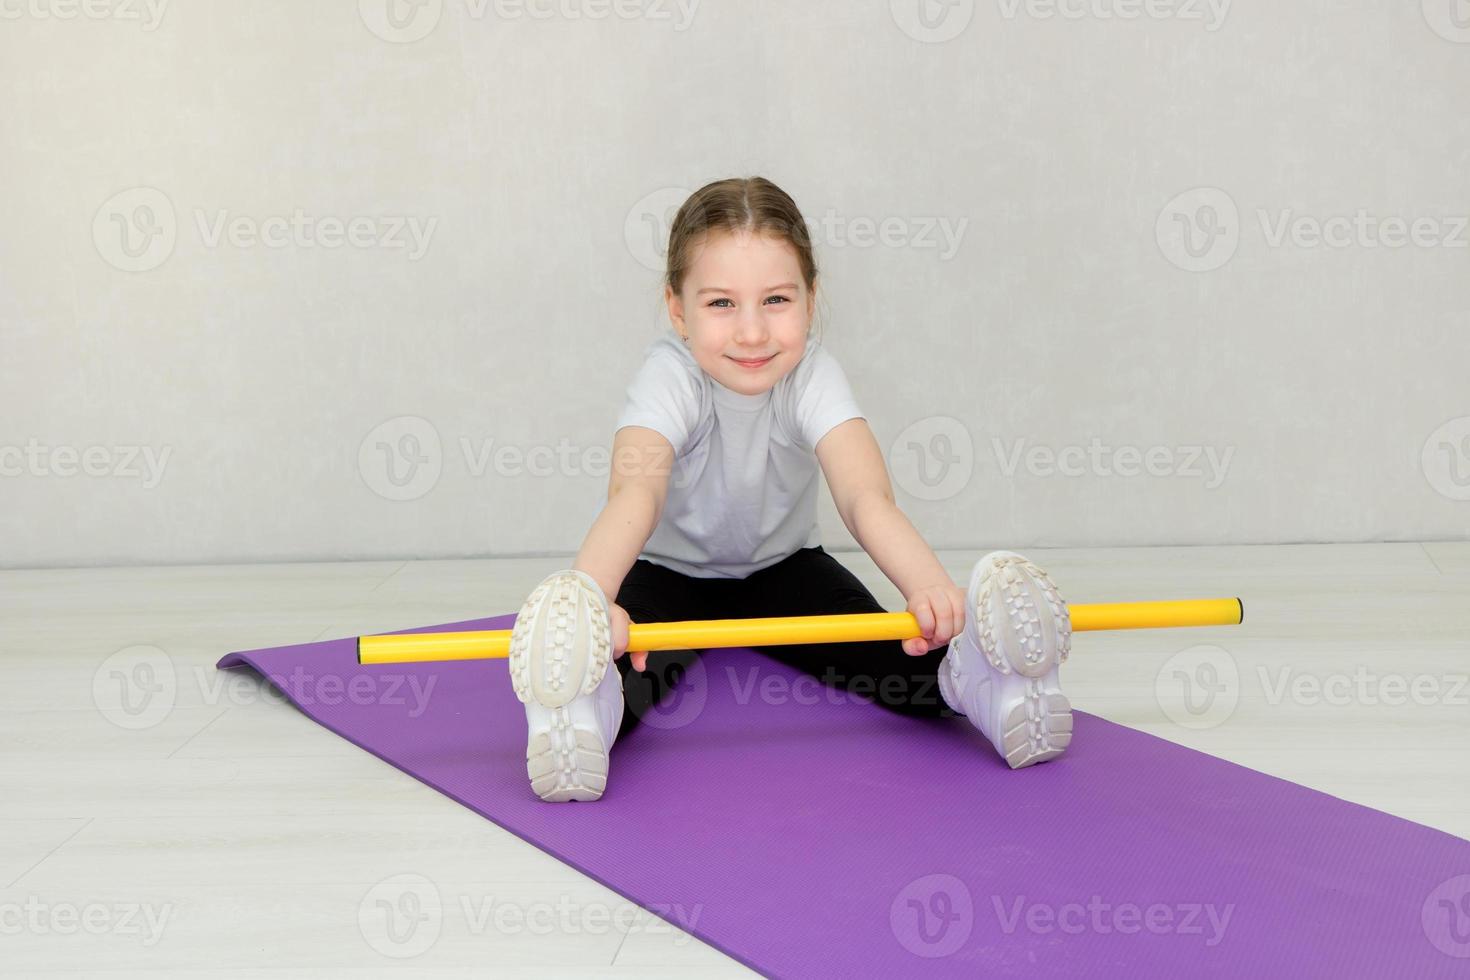 cute little girl sitting on a mat and doing exercises with a gymnastic stick, kids fitness photo